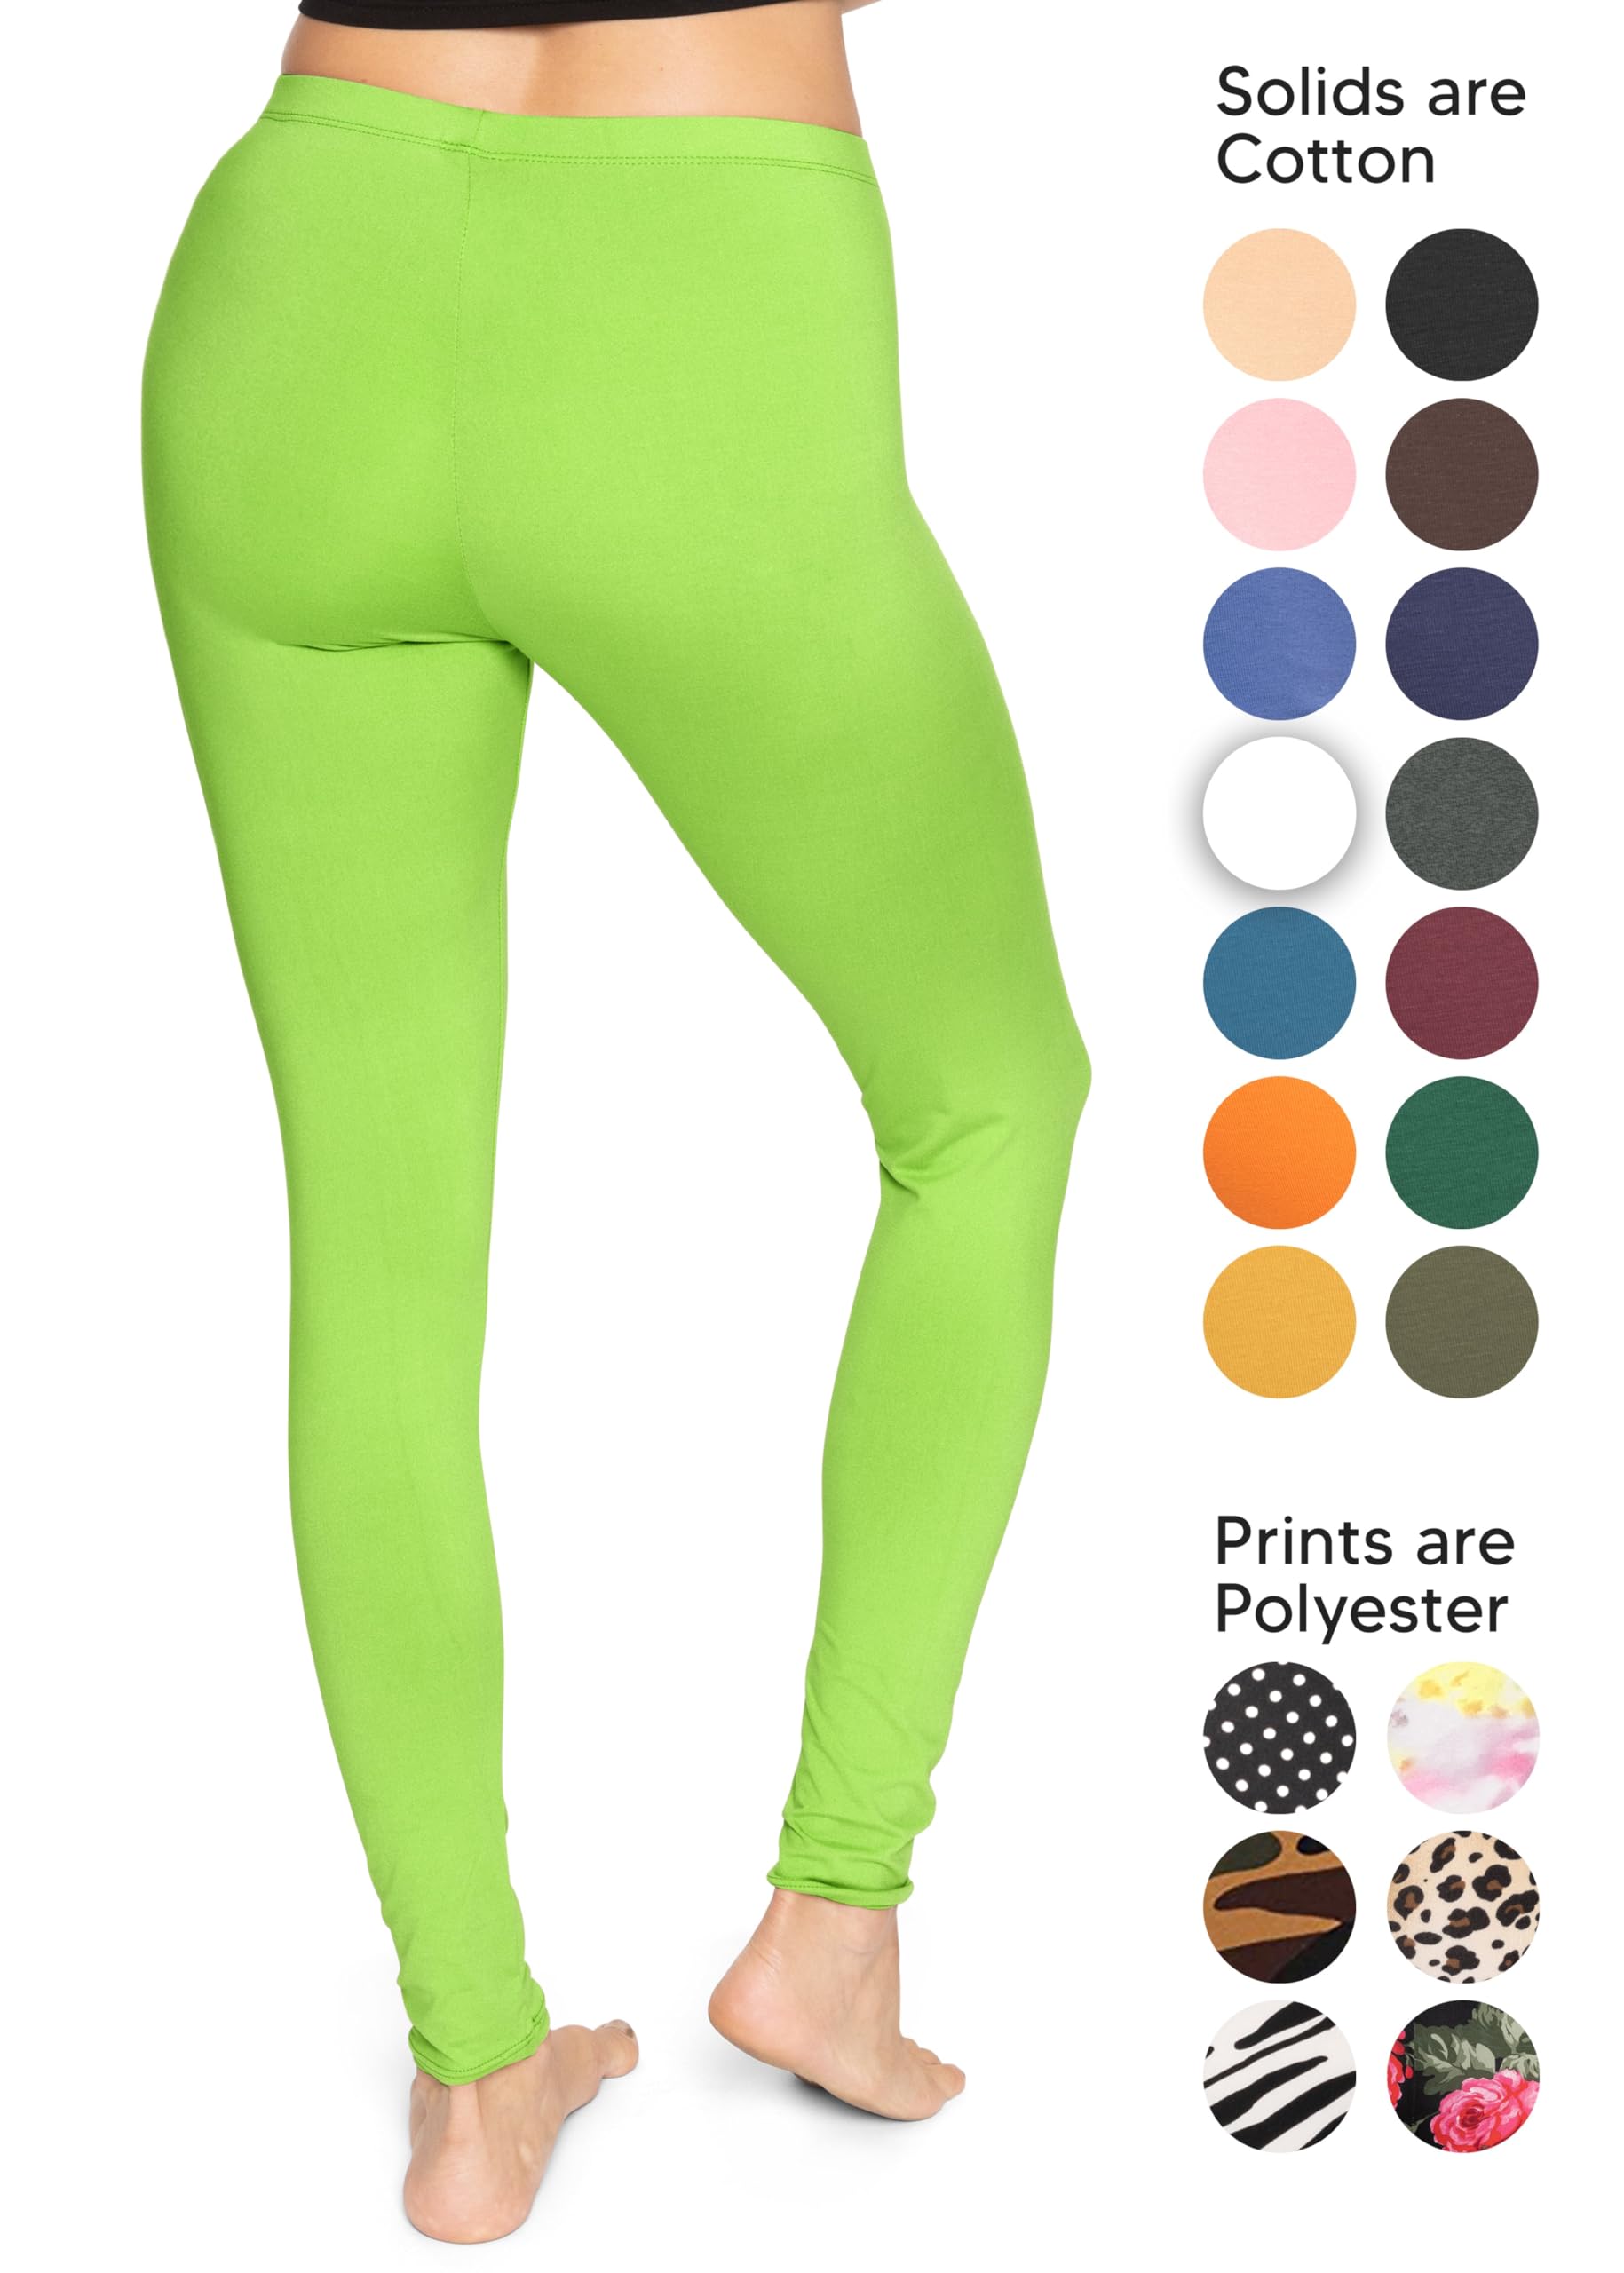 Stretch is Comfort Women's Cotton Plus Size Leggings Lime Green 4X